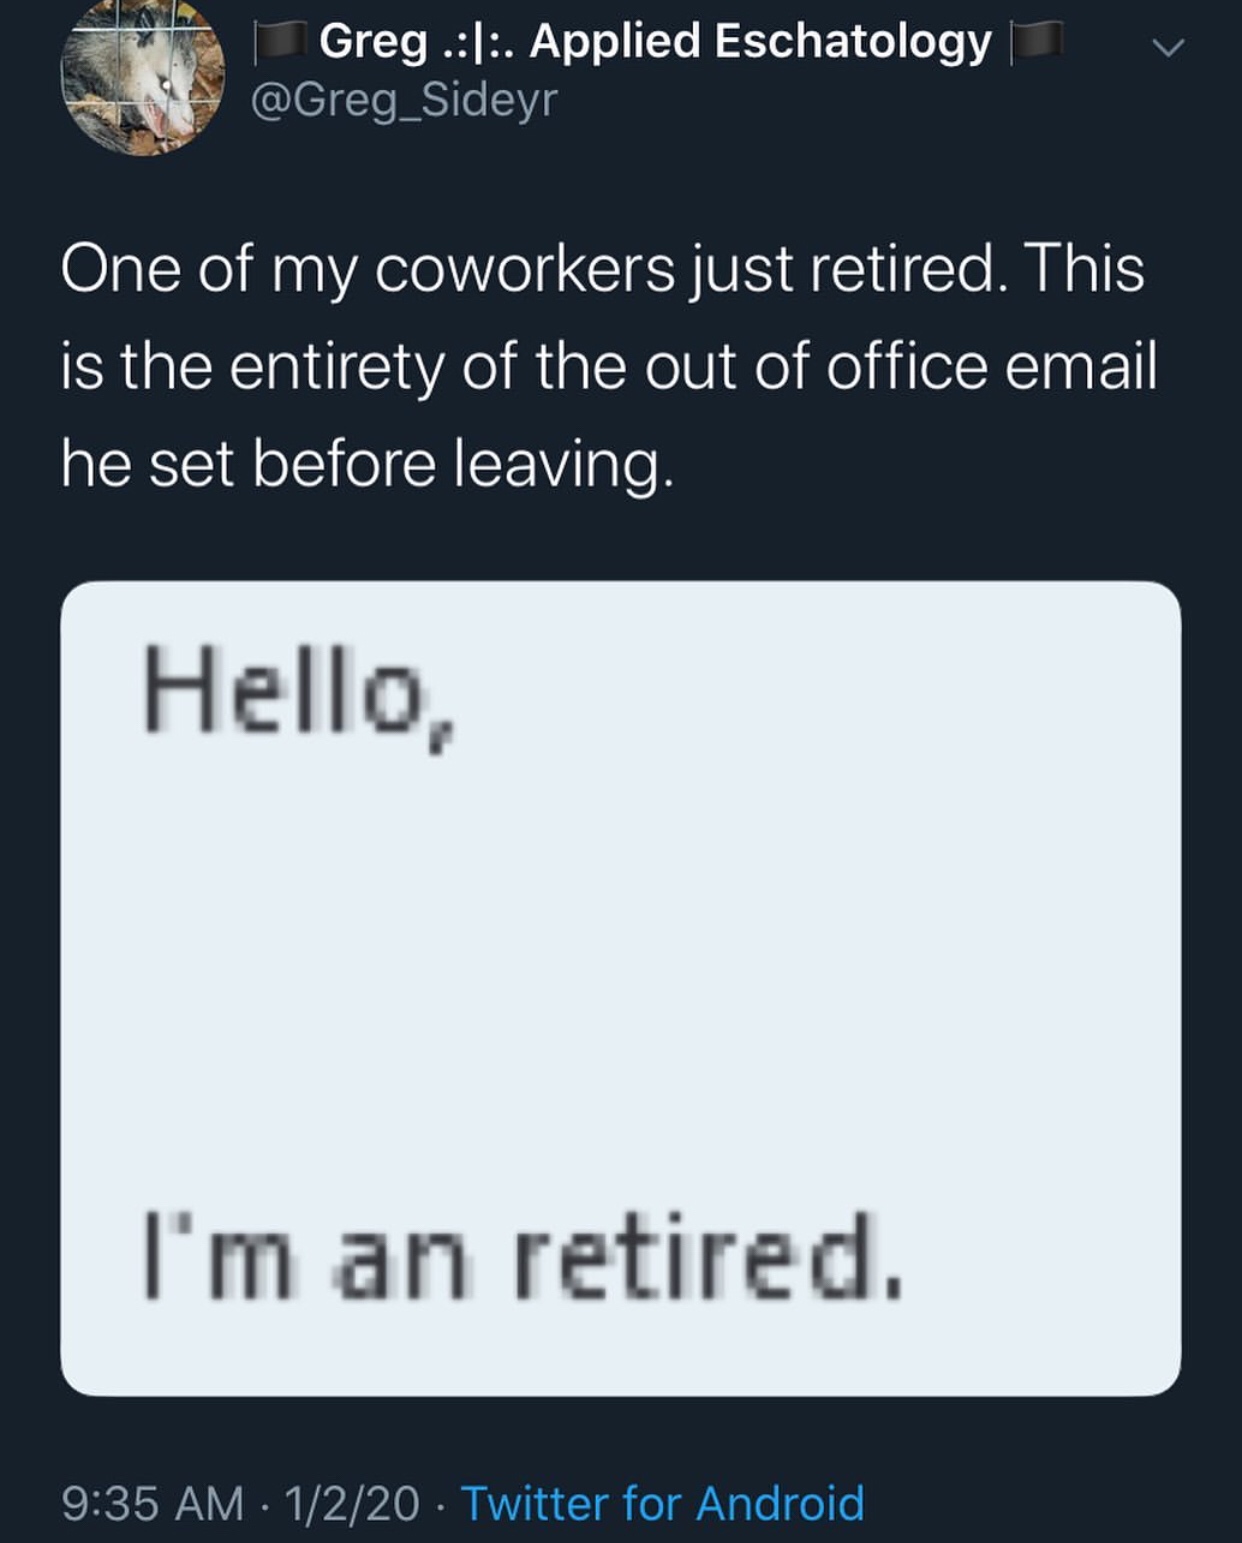 screenshot - Greg .|. Applied Eschatology v One of my coworkers just retired. This is the entirety of the out of office email he set before leaving. Hello, I'm an retired. 1220 Twitter for Android